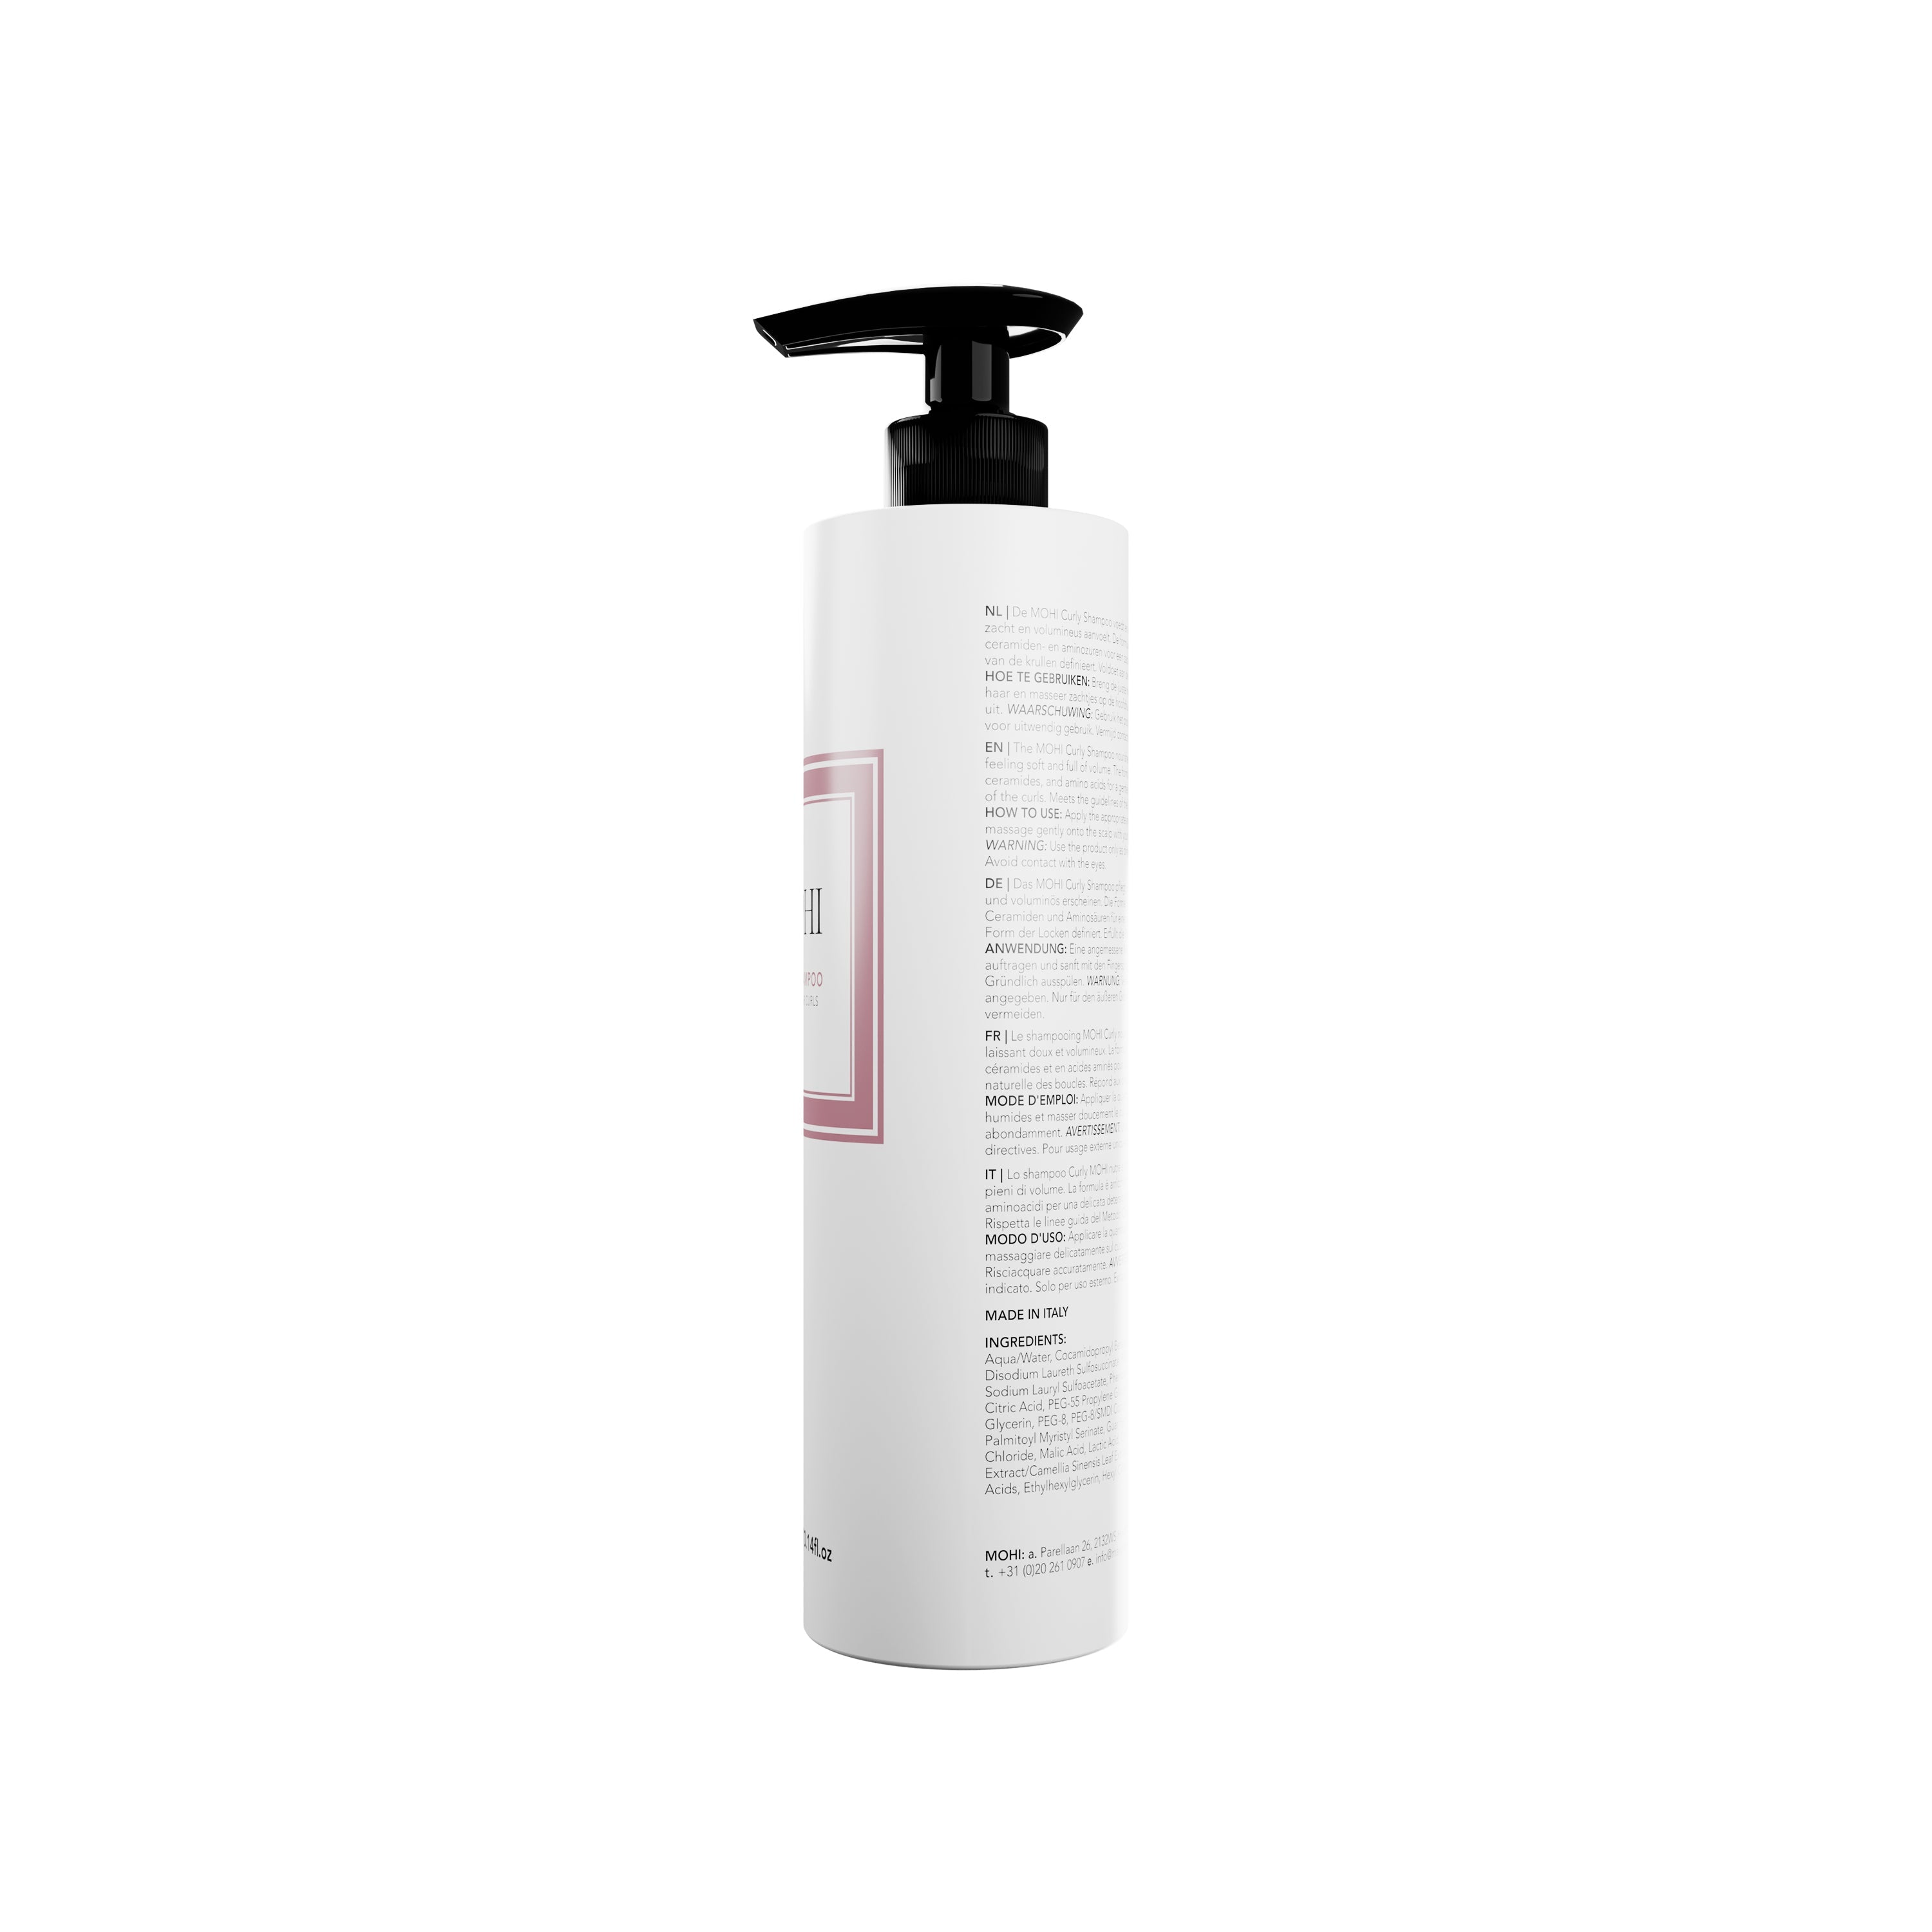 OUTLET MOHI Curl Shampoo 300ml - Max Pro x MOHI